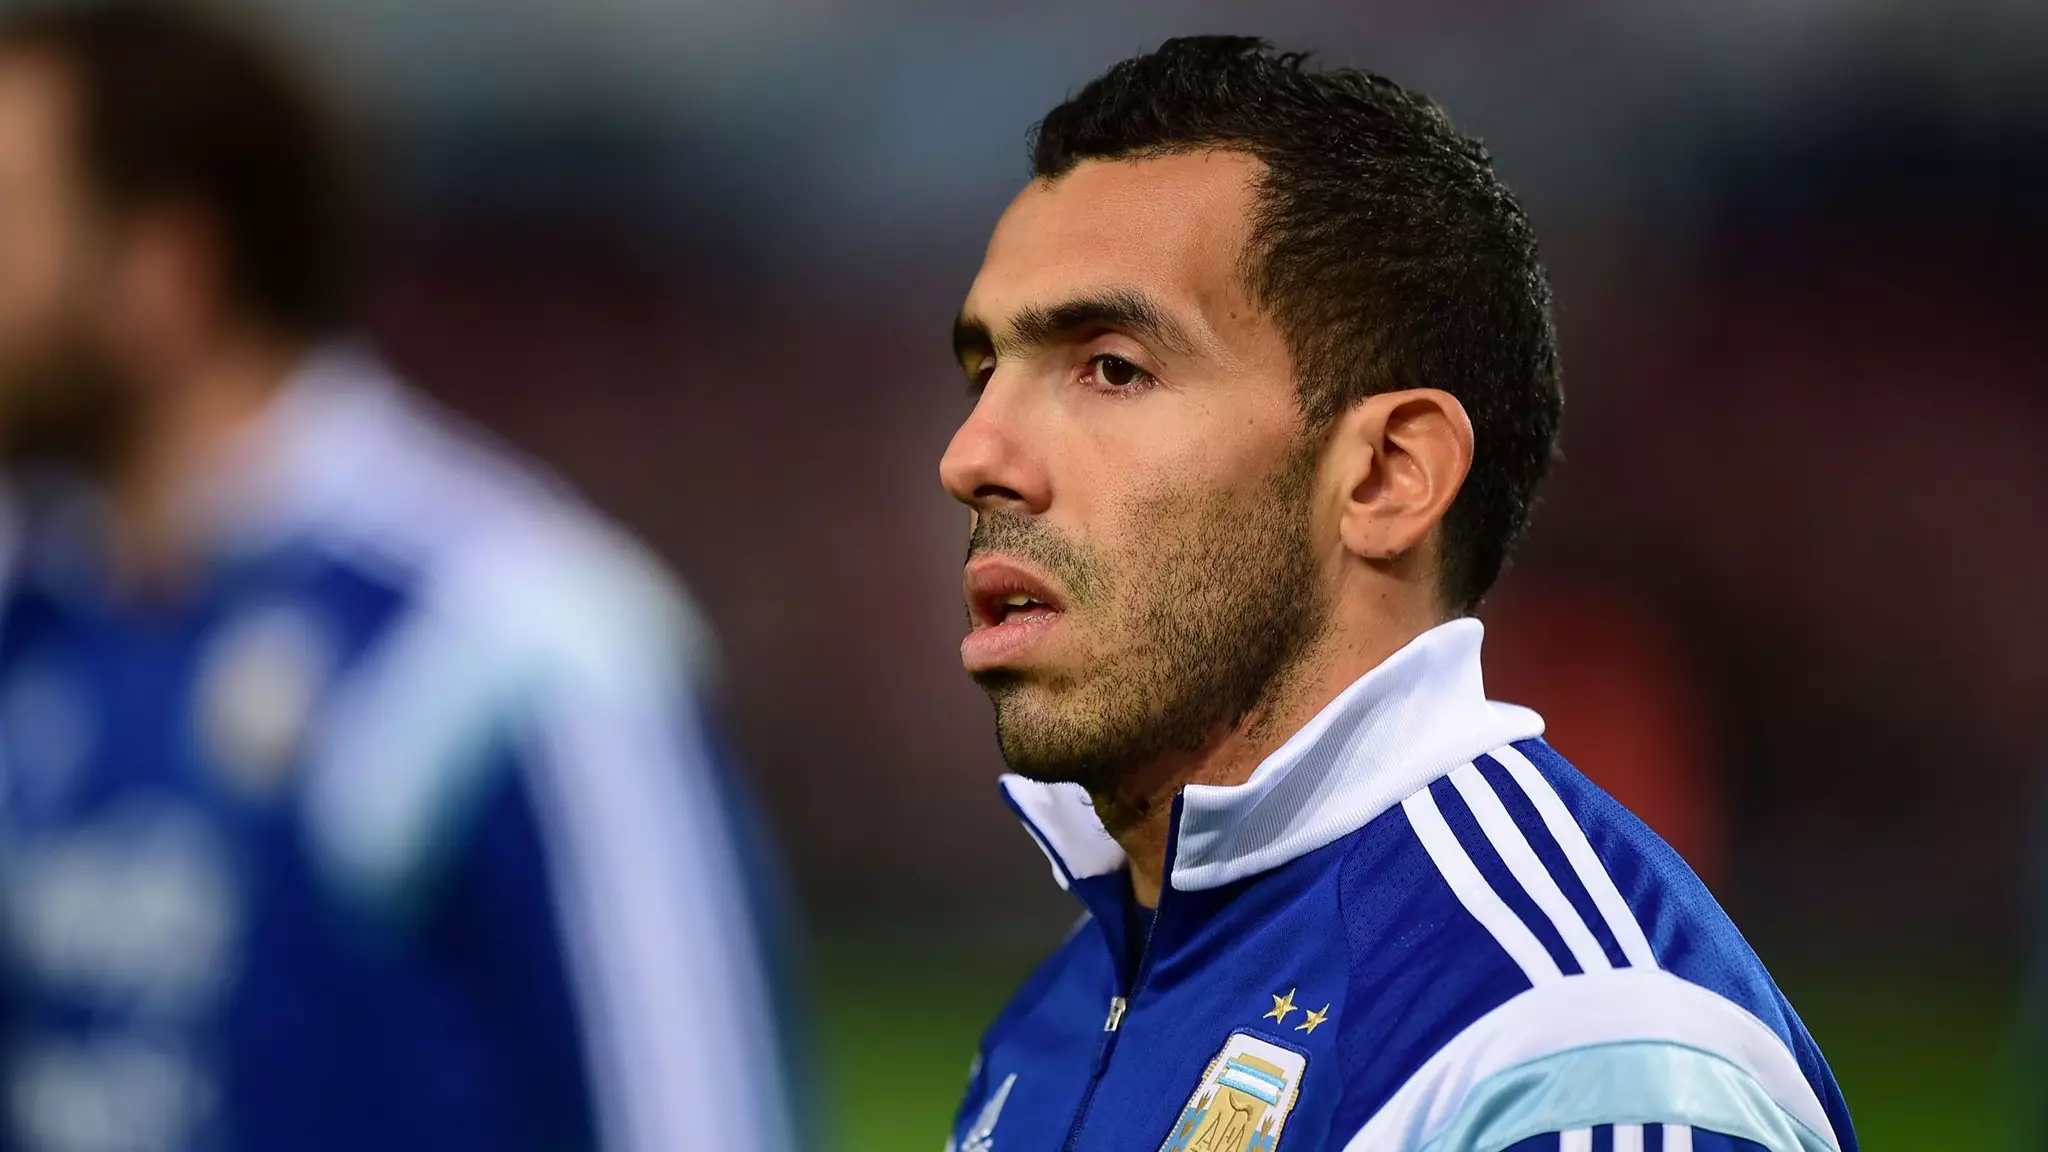 Carlos Tevez Responds To Reports He Was Injured Playing In Jail